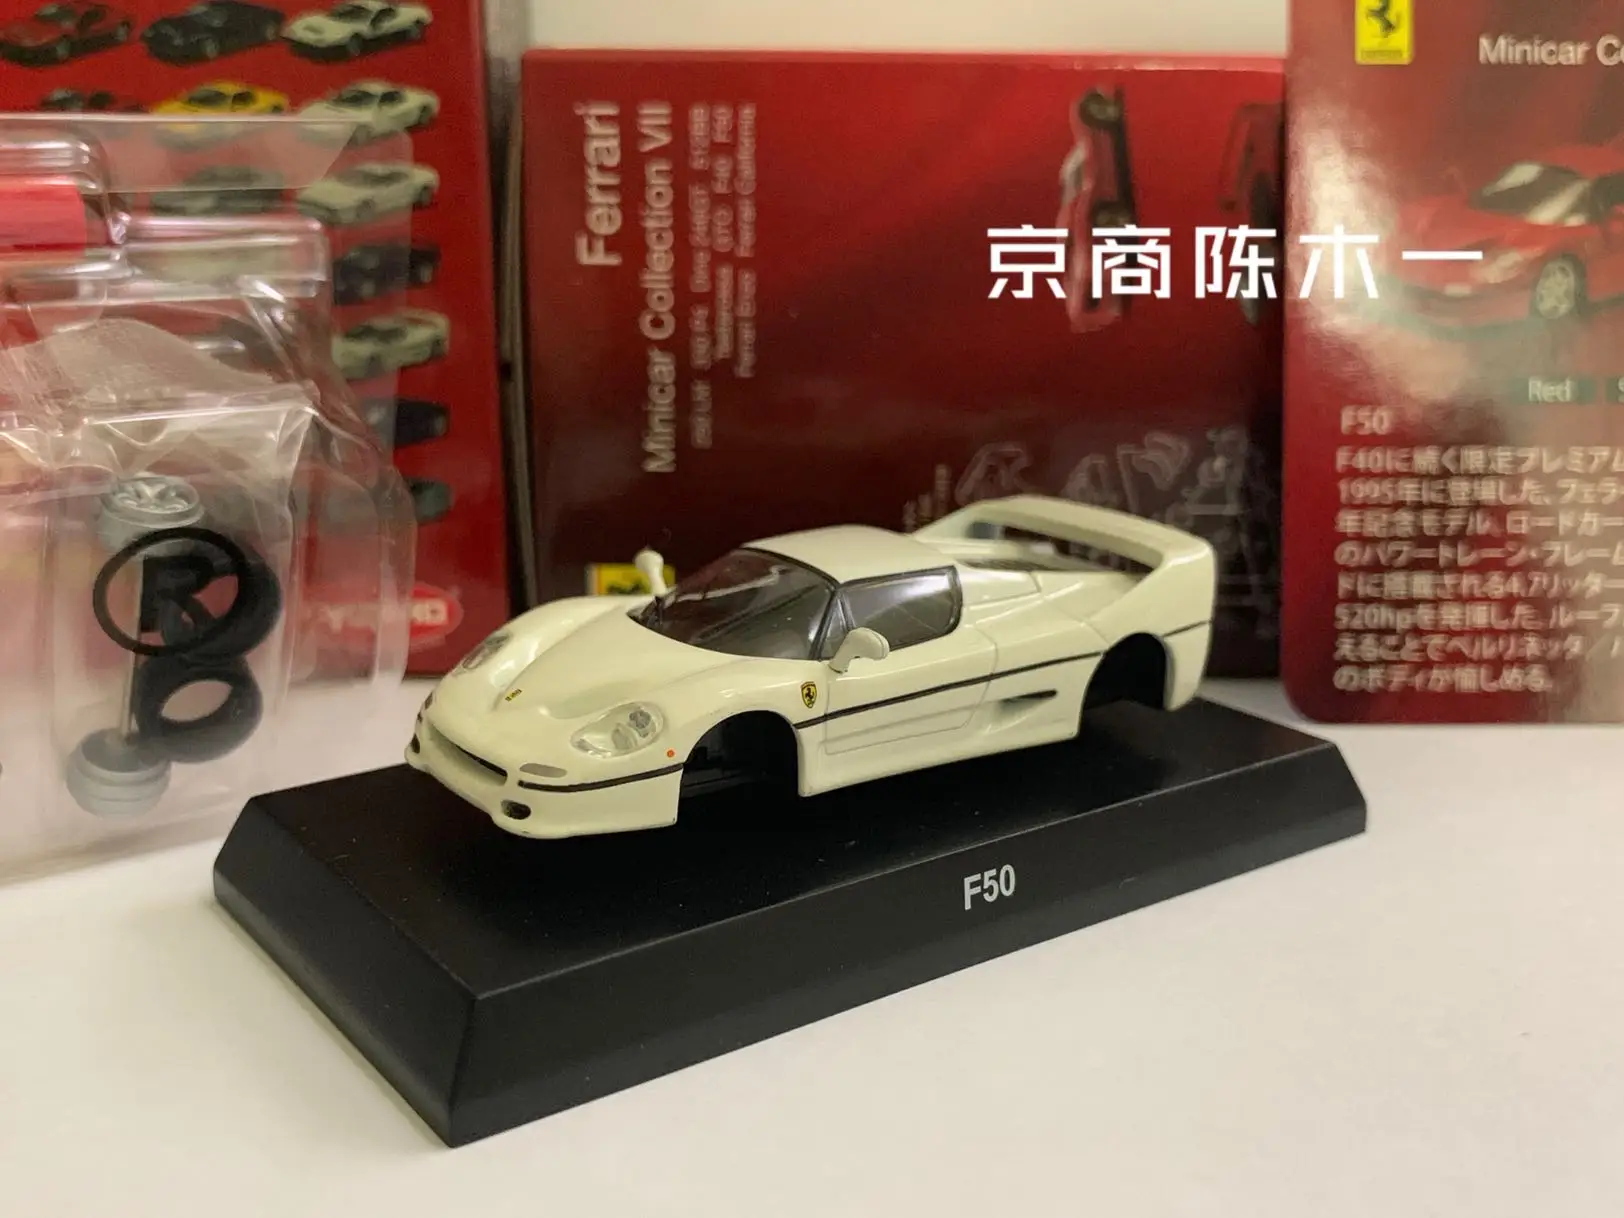 

1/64 KYOSHO Ferrari F50 out of print LM F1 RACING Collection of die-cast alloy assembled car decoration model toys